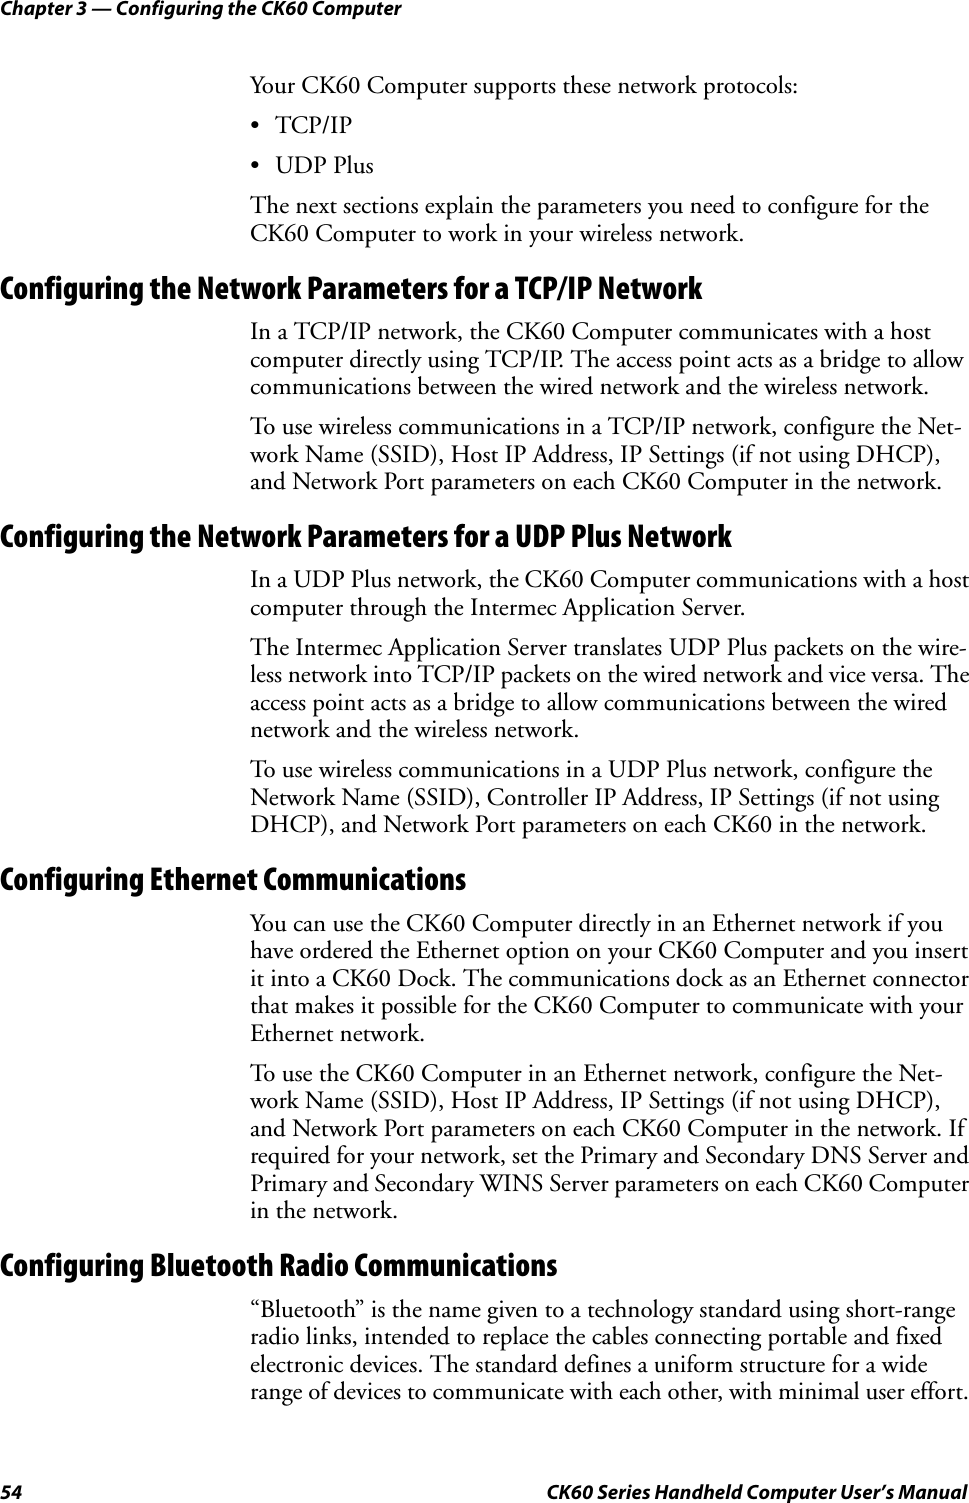 Chapter 3 — Configuring the CK60 Computer54 CK60 Series Handheld Computer User’s ManualYour CK60 Computer supports these network protocols:•TCP/IP•UDP PlusThe next sections explain the parameters you need to configure for the CK60 Computer to work in your wireless network.Configuring the Network Parameters for a TCP/IP NetworkIn a TCP/IP network, the CK60 Computer communicates with a host computer directly using TCP/IP. The access point acts as a bridge to allow communications between the wired network and the wireless network.To use wireless communications in a TCP/IP network, configure the Net-work Name (SSID), Host IP Address, IP Settings (if not using DHCP), and Network Port parameters on each CK60 Computer in the network.Configuring the Network Parameters for a UDP Plus NetworkIn a UDP Plus network, the CK60 Computer communications with a host computer through the Intermec Application Server.The Intermec Application Server translates UDP Plus packets on the wire-less network into TCP/IP packets on the wired network and vice versa. The access point acts as a bridge to allow communications between the wired network and the wireless network.To use wireless communications in a UDP Plus network, configure the Network Name (SSID), Controller IP Address, IP Settings (if not using DHCP), and Network Port parameters on each CK60 in the network.Configuring Ethernet CommunicationsYou can use the CK60 Computer directly in an Ethernet network if you have ordered the Ethernet option on your CK60 Computer and you insert it into a CK60 Dock. The communications dock as an Ethernet connector that makes it possible for the CK60 Computer to communicate with your Ethernet network.To use the CK60 Computer in an Ethernet network, configure the Net-work Name (SSID), Host IP Address, IP Settings (if not using DHCP), and Network Port parameters on each CK60 Computer in the network. If required for your network, set the Primary and Secondary DNS Server and Primary and Secondary WINS Server parameters on each CK60 Computer in the network.Configuring Bluetooth Radio Communications“Bluetooth” is the name given to a technology standard using short-range radio links, intended to replace the cables connecting portable and fixed electronic devices. The standard defines a uniform structure for a wide range of devices to communicate with each other, with minimal user effort. 